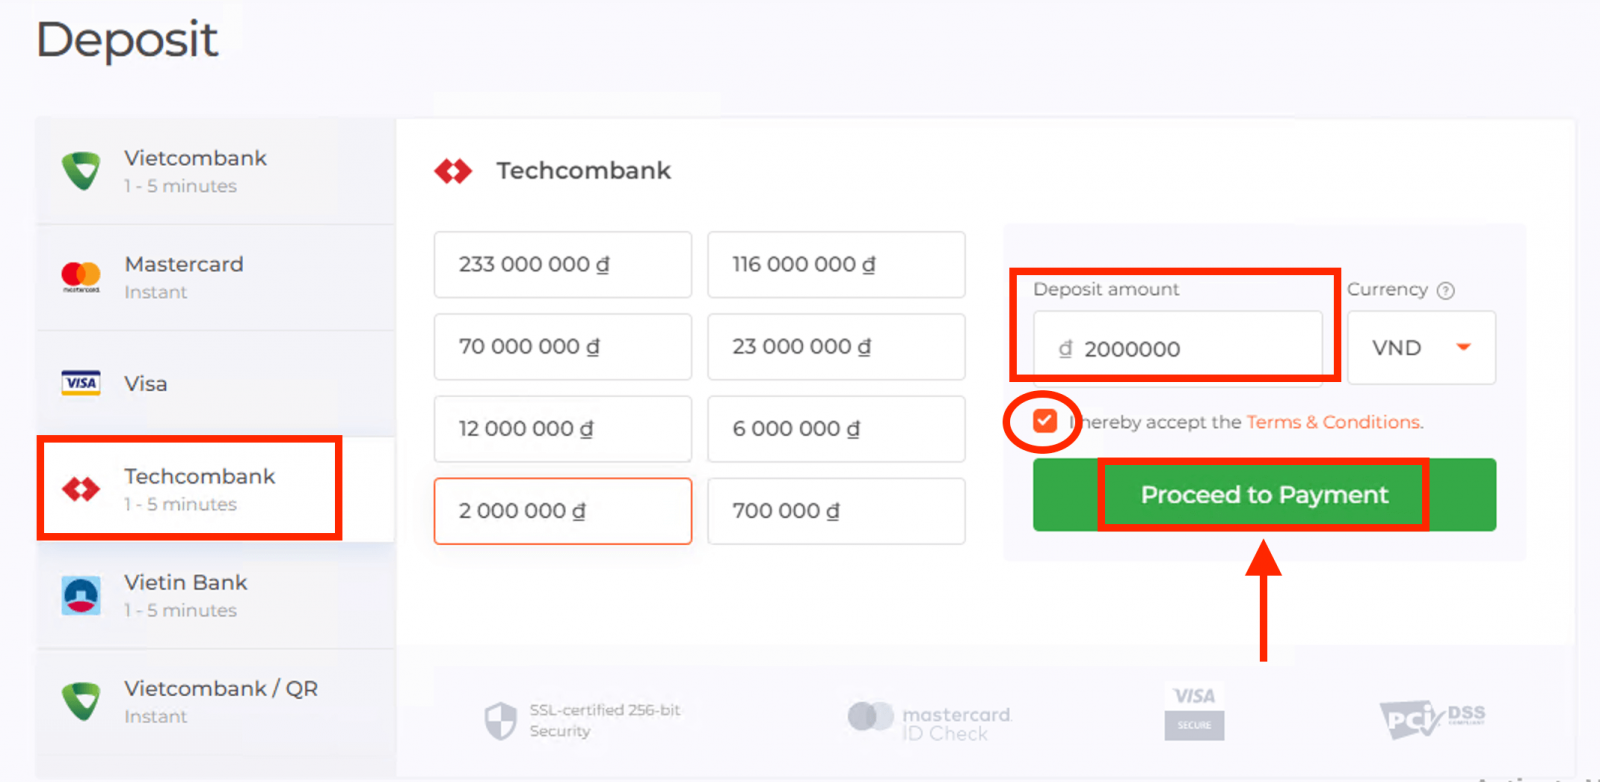 How to Login and Deposit Money in IQ Option